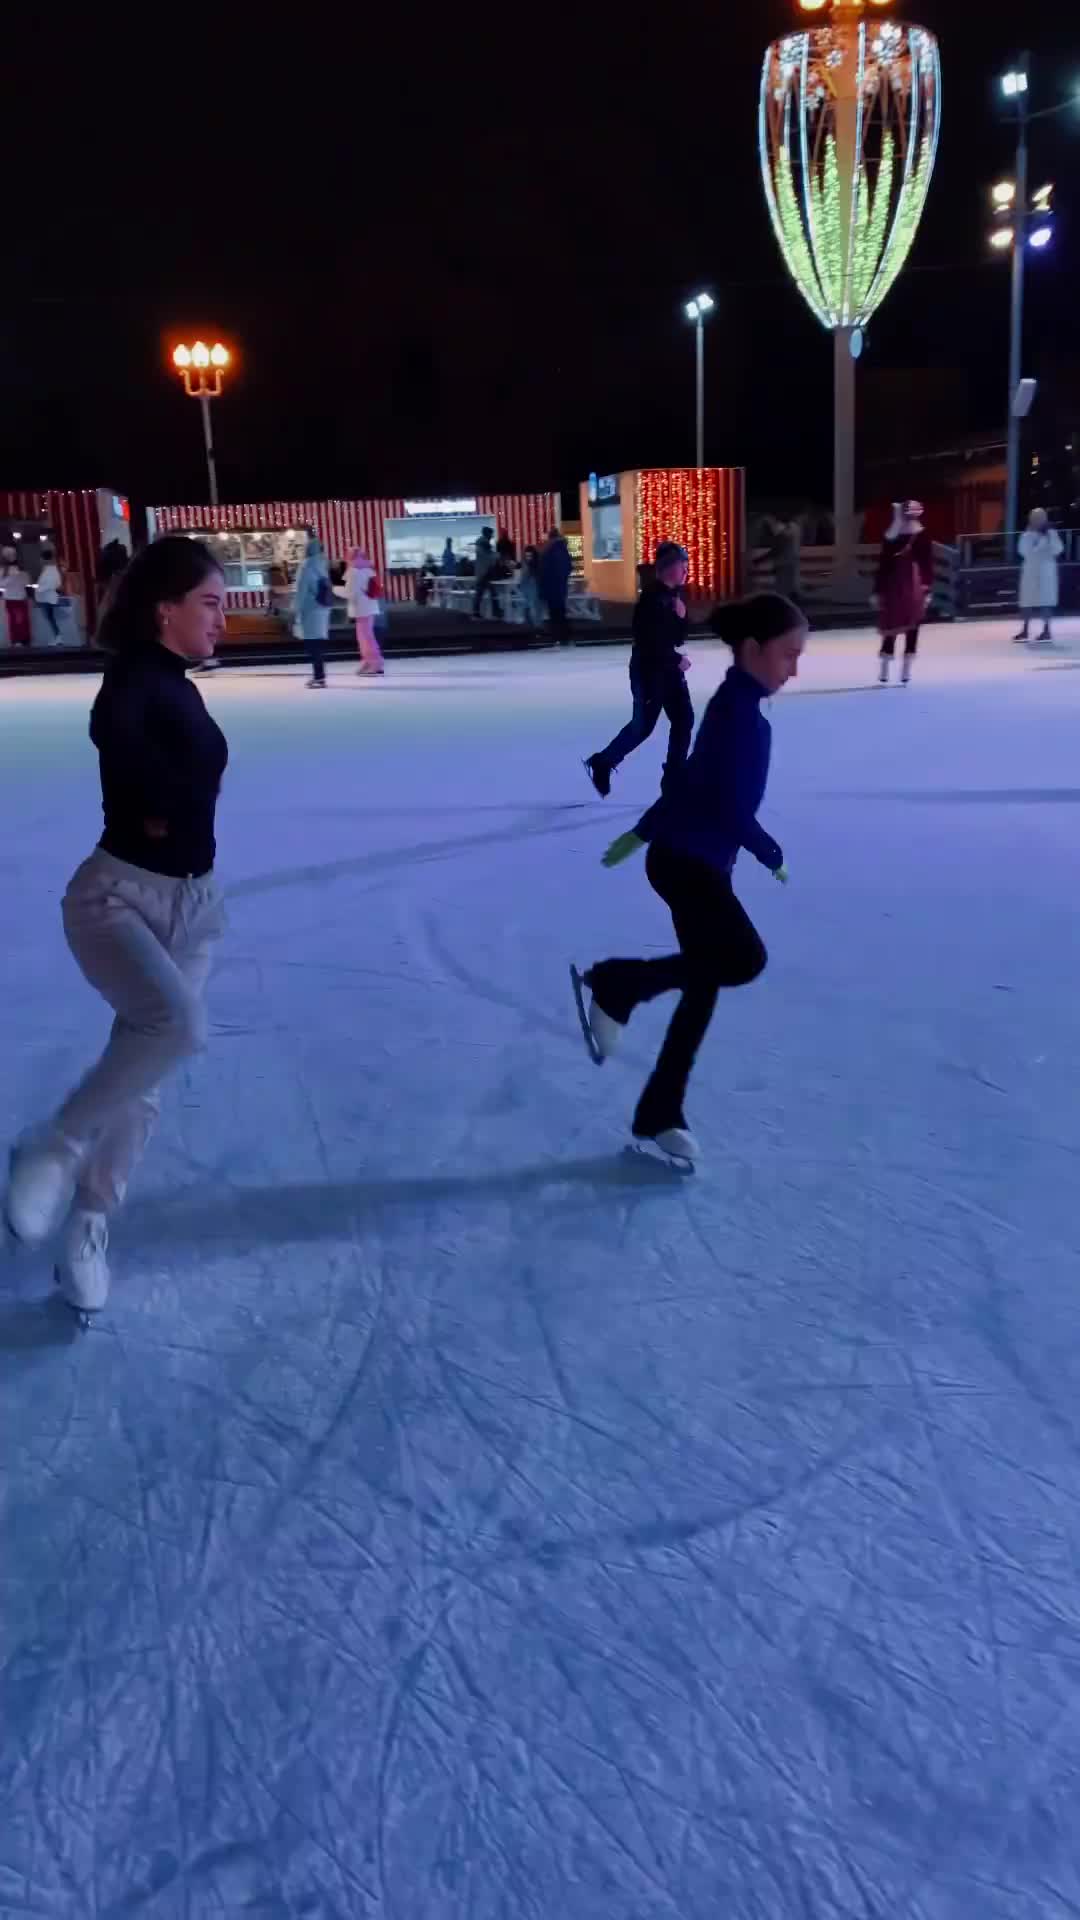 Waiting for 2022: Ice Skating in Moscow